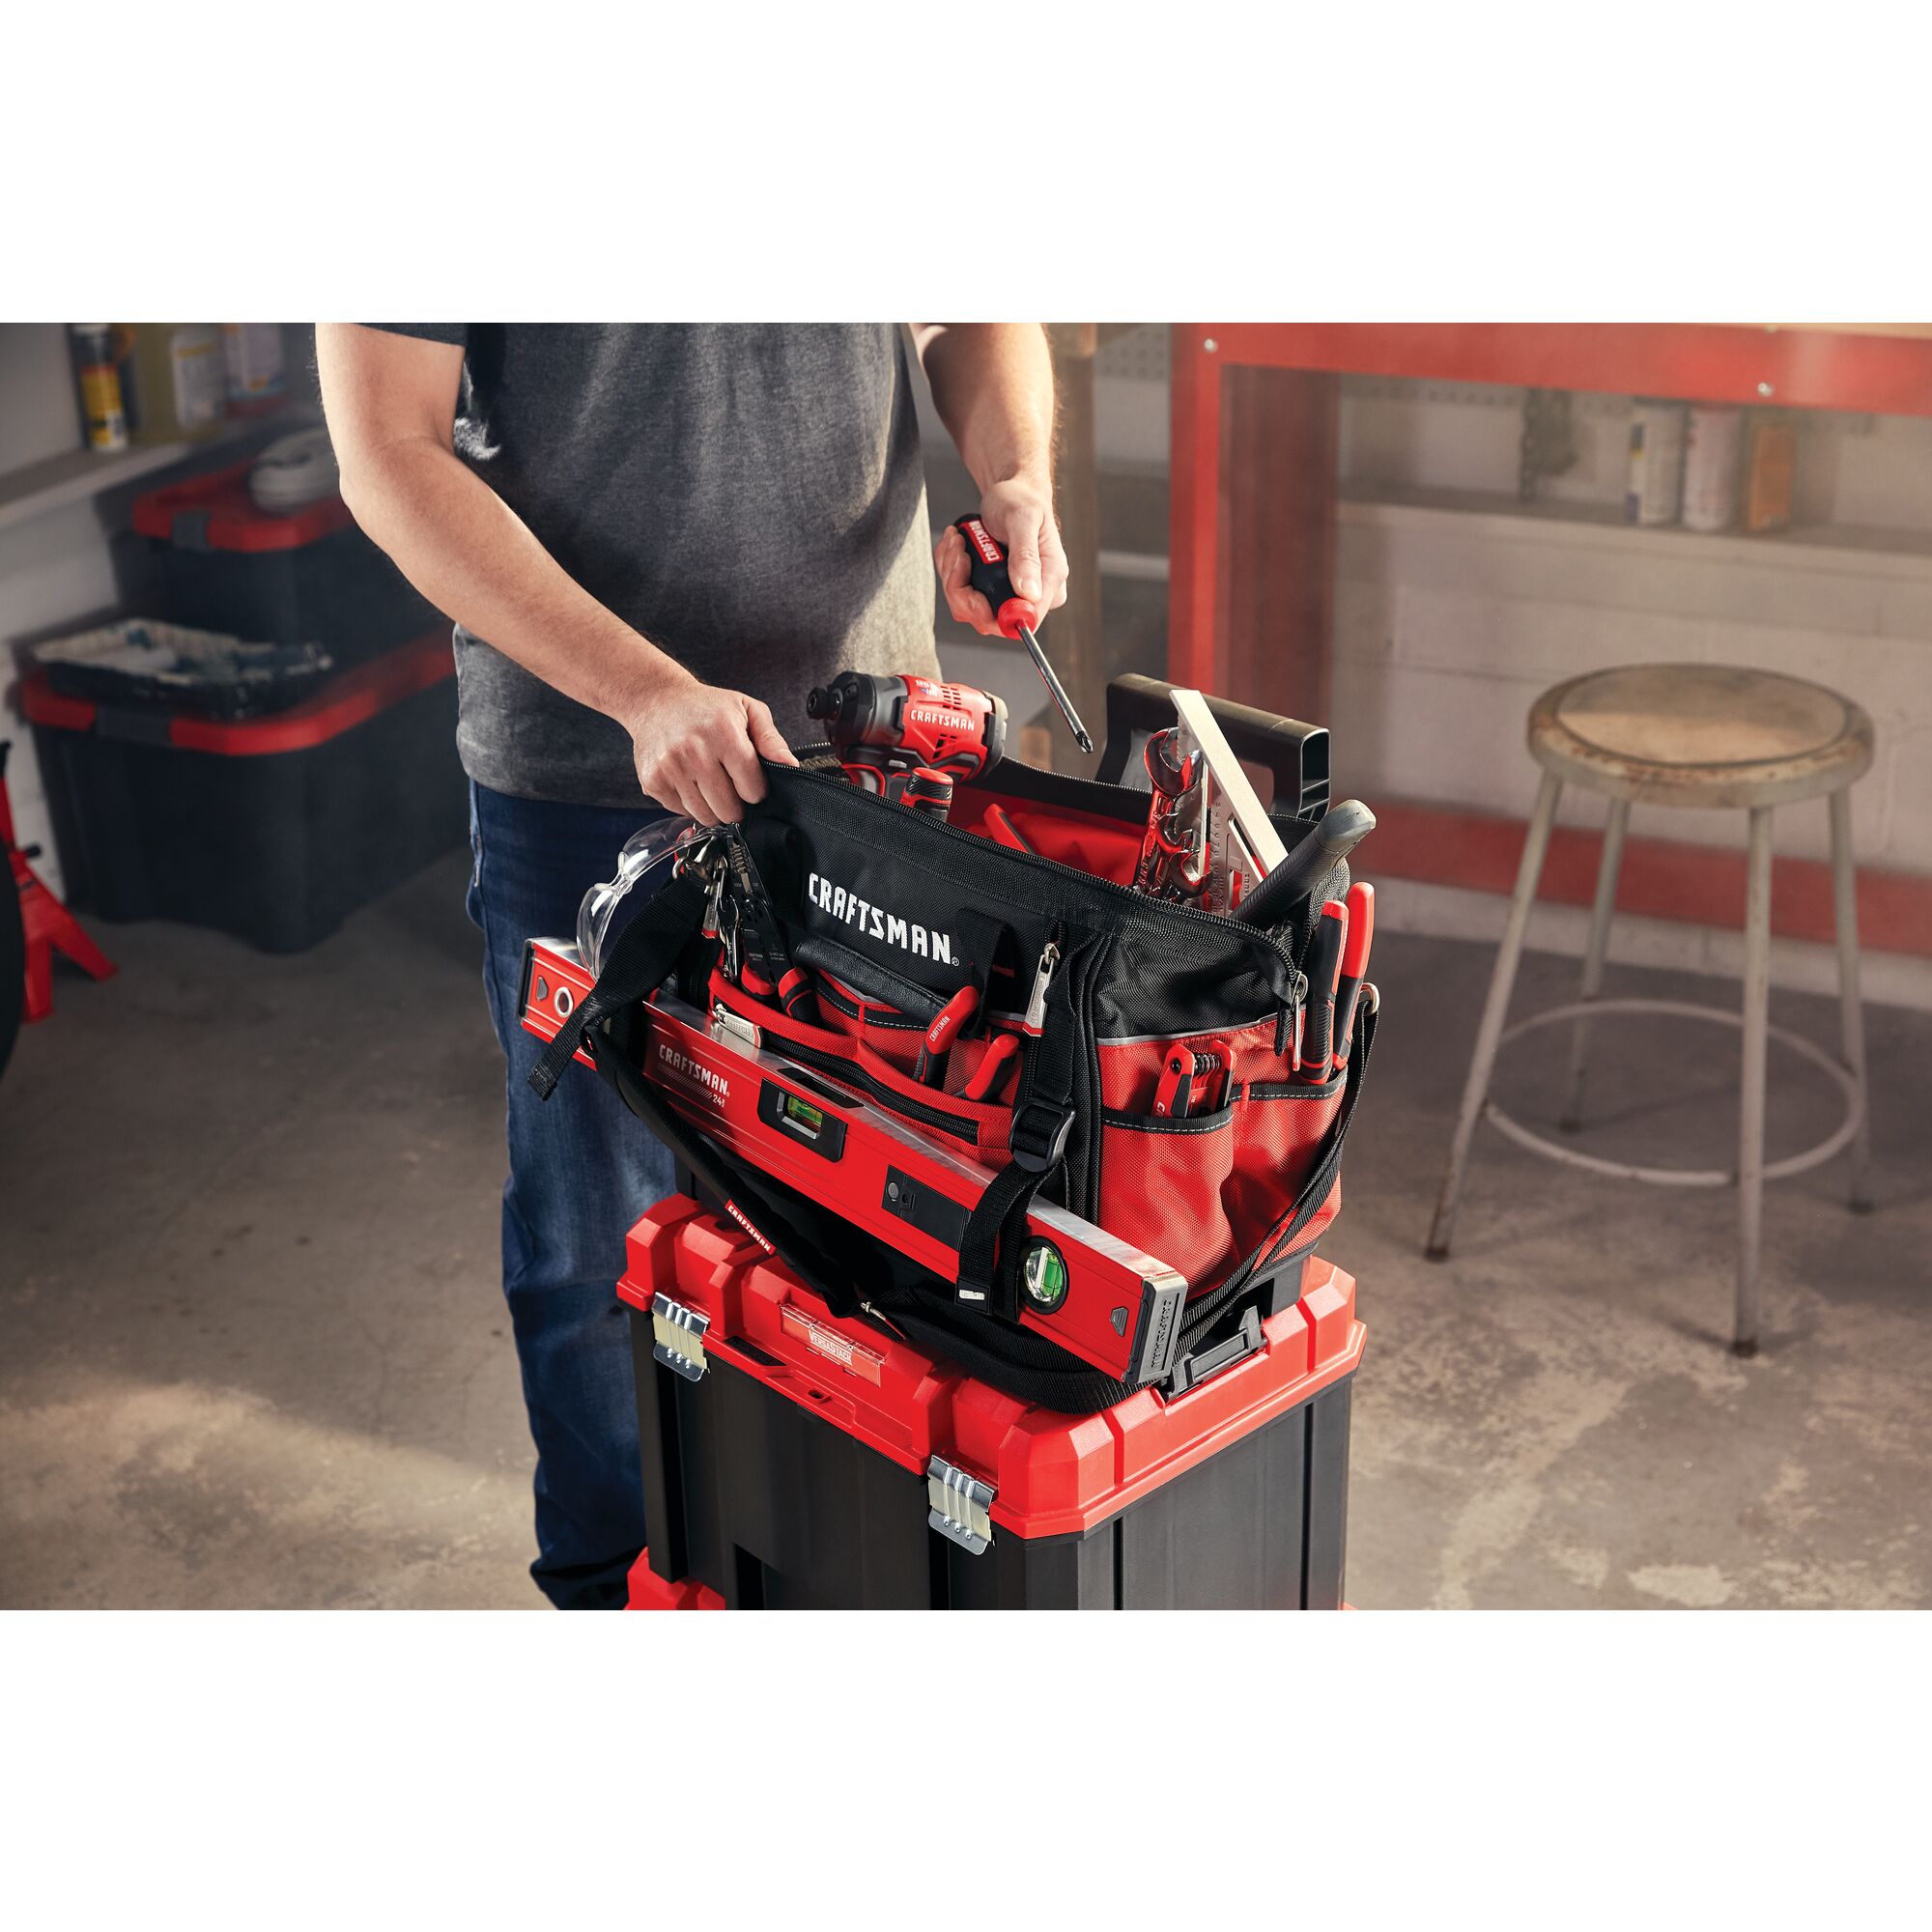 Versastack 17 inch tool bag being used to store items.